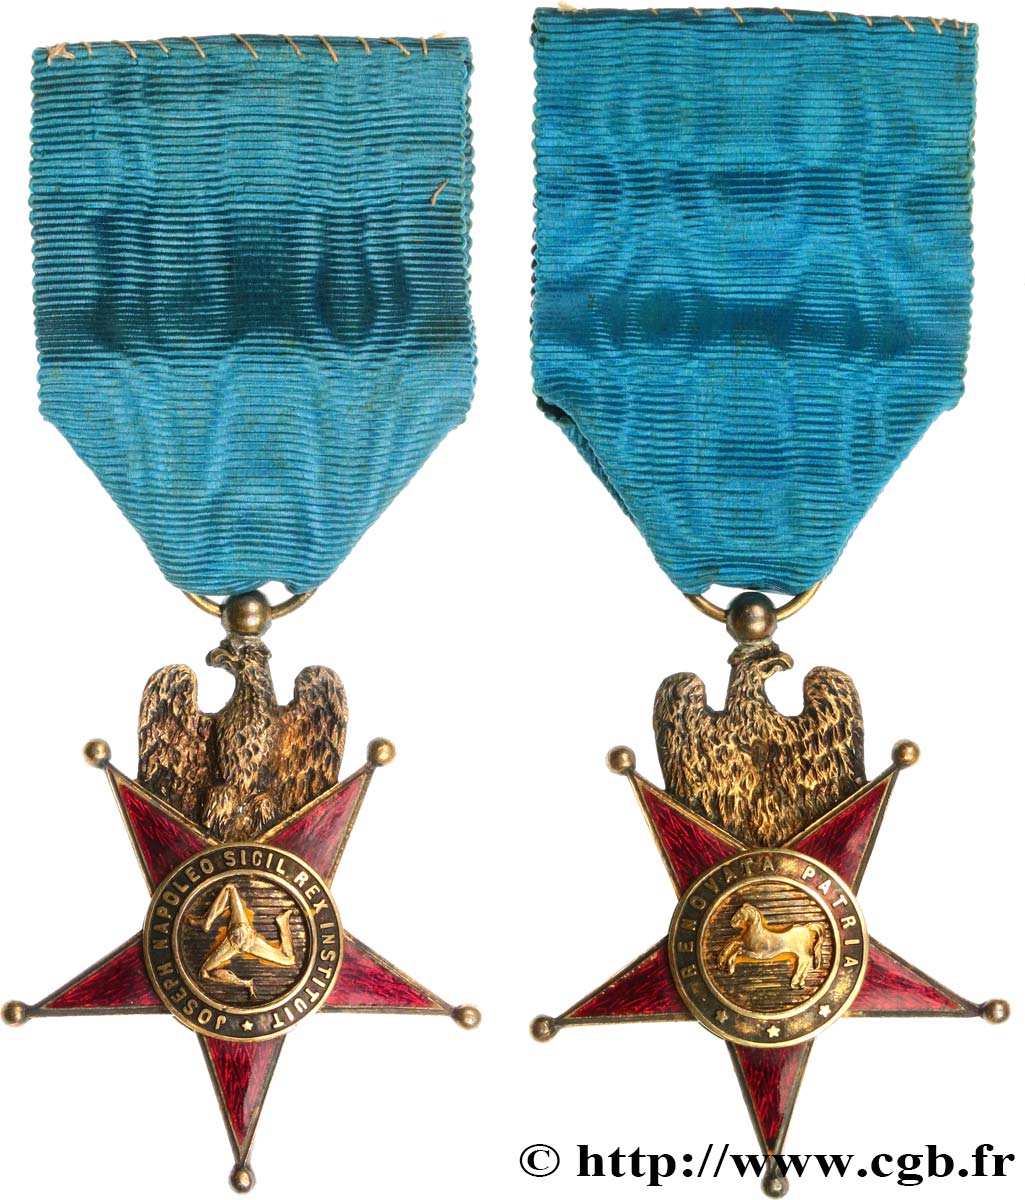 ITALY - KINGDOM OF THE TWO SICILIES Médaille, Ordre des deux Siciles XF